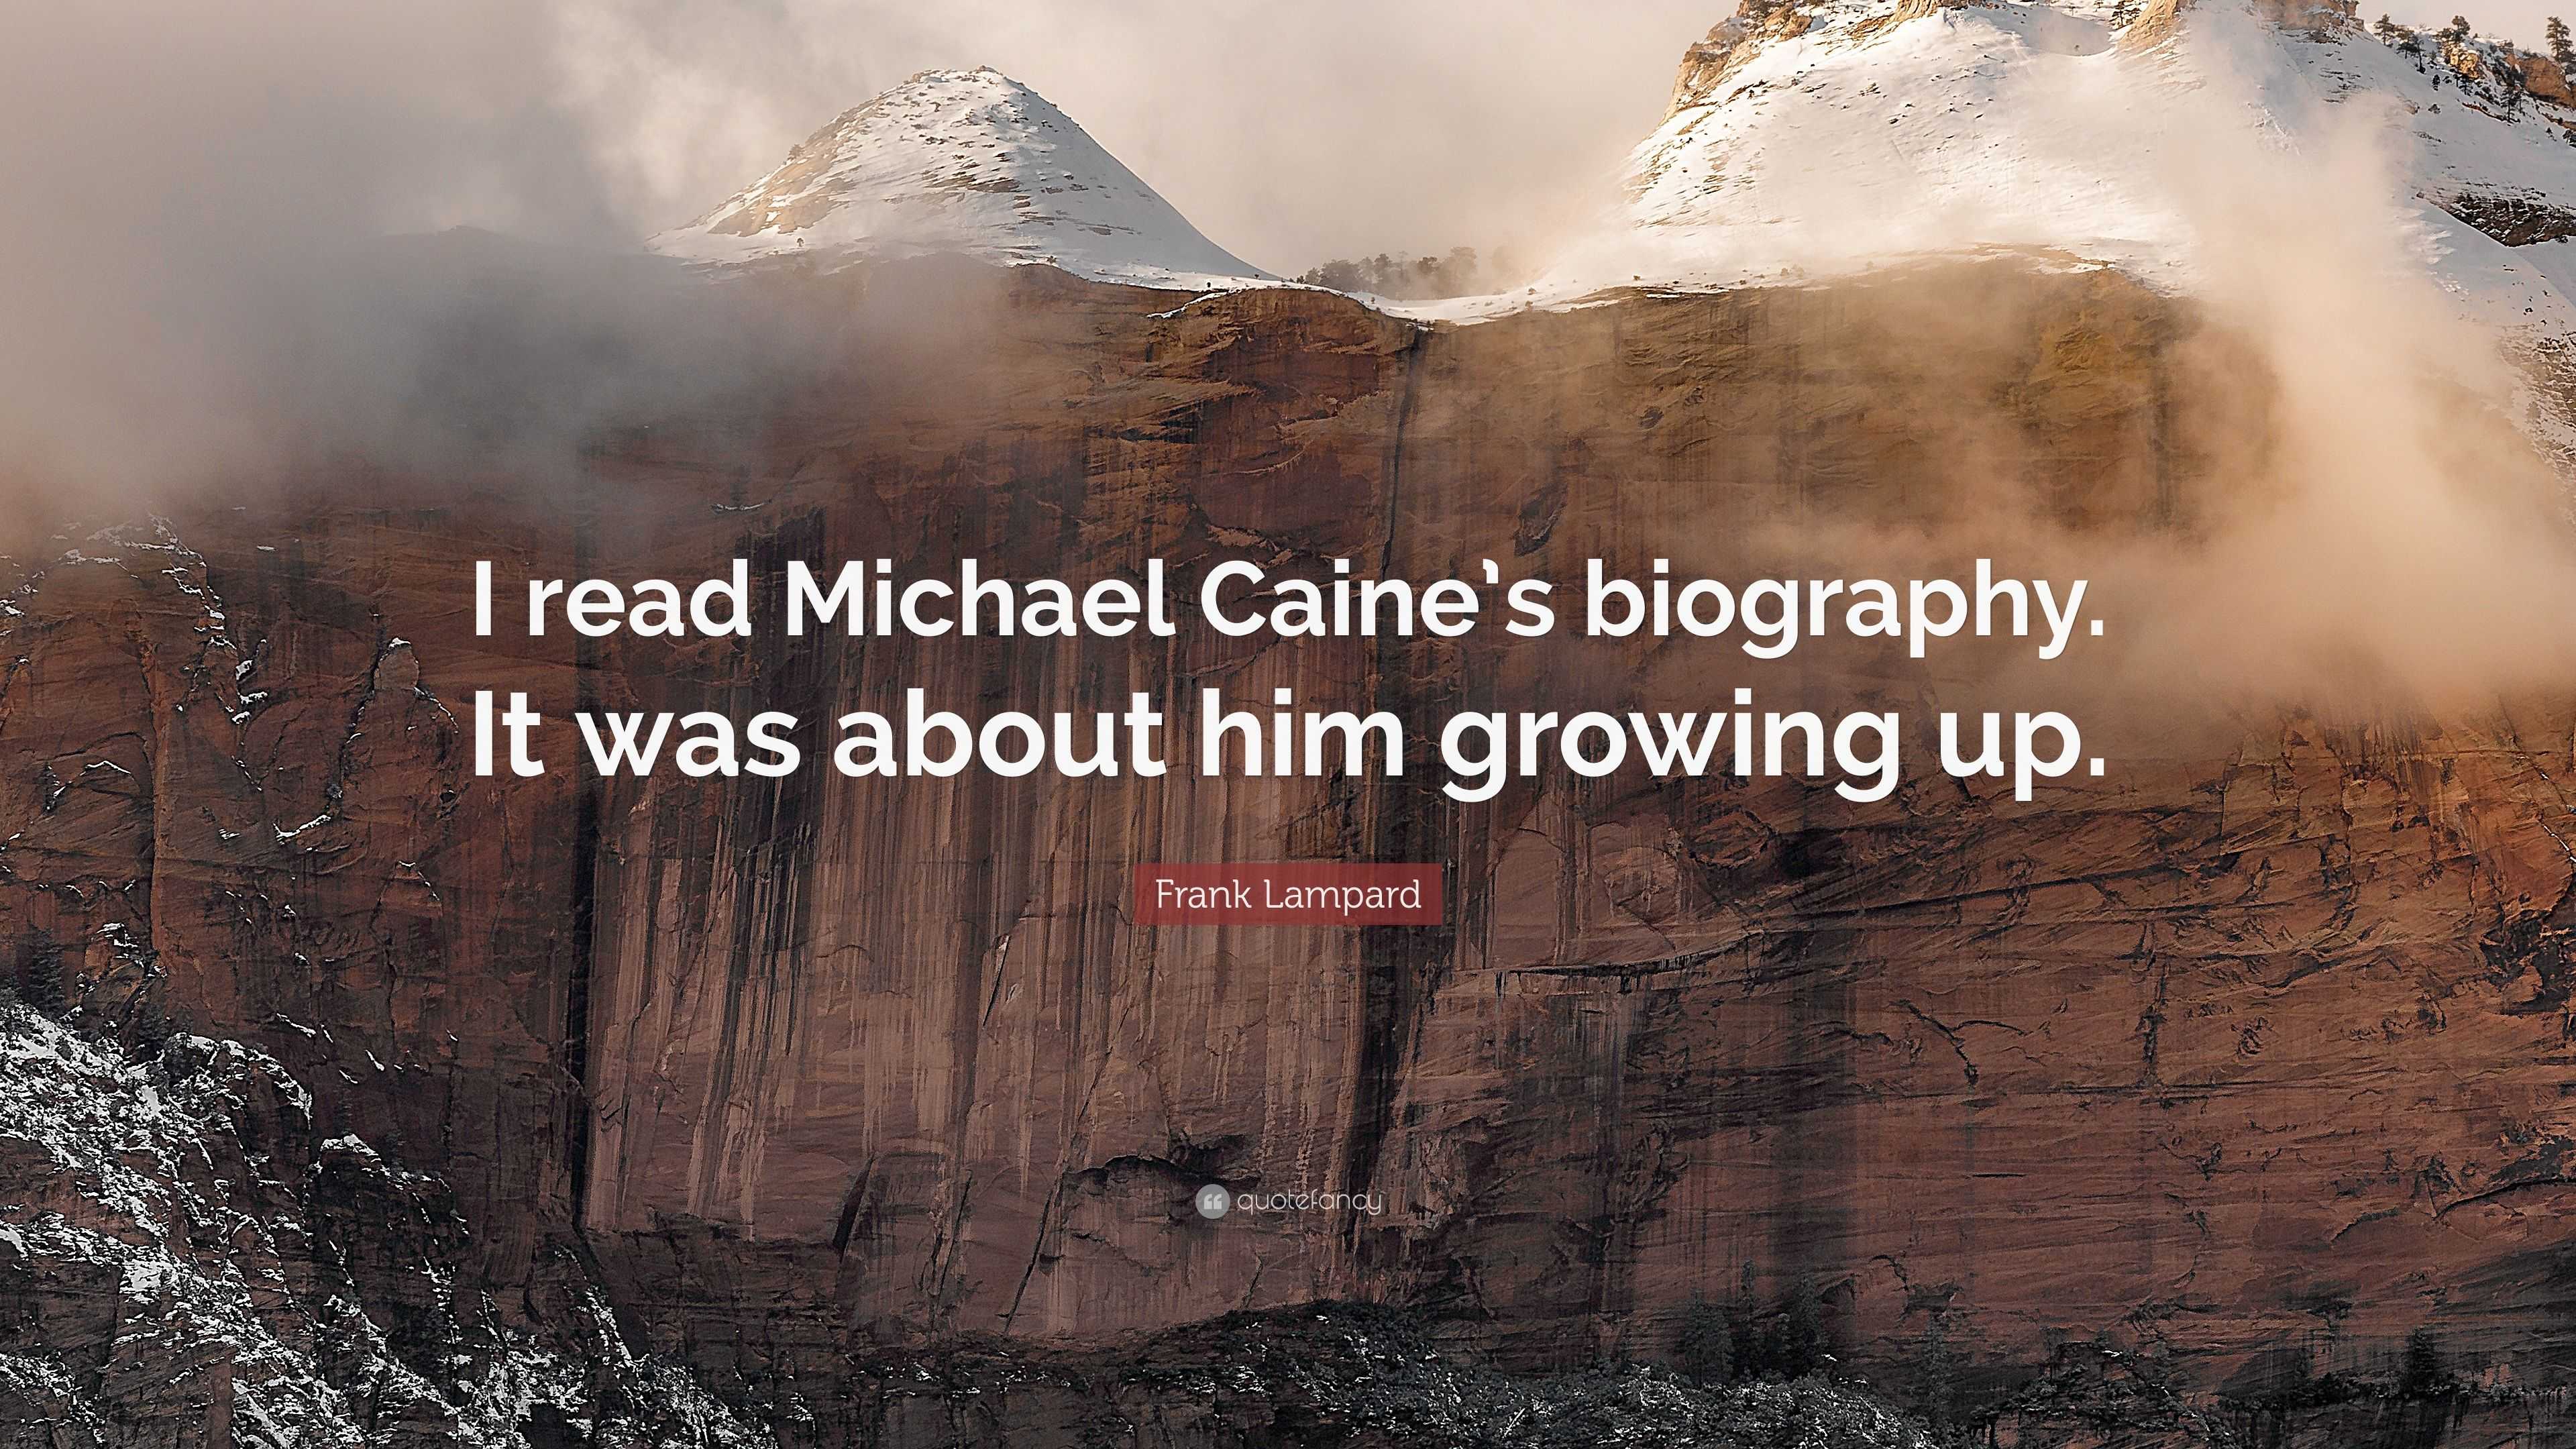 Michael Caine - Biography